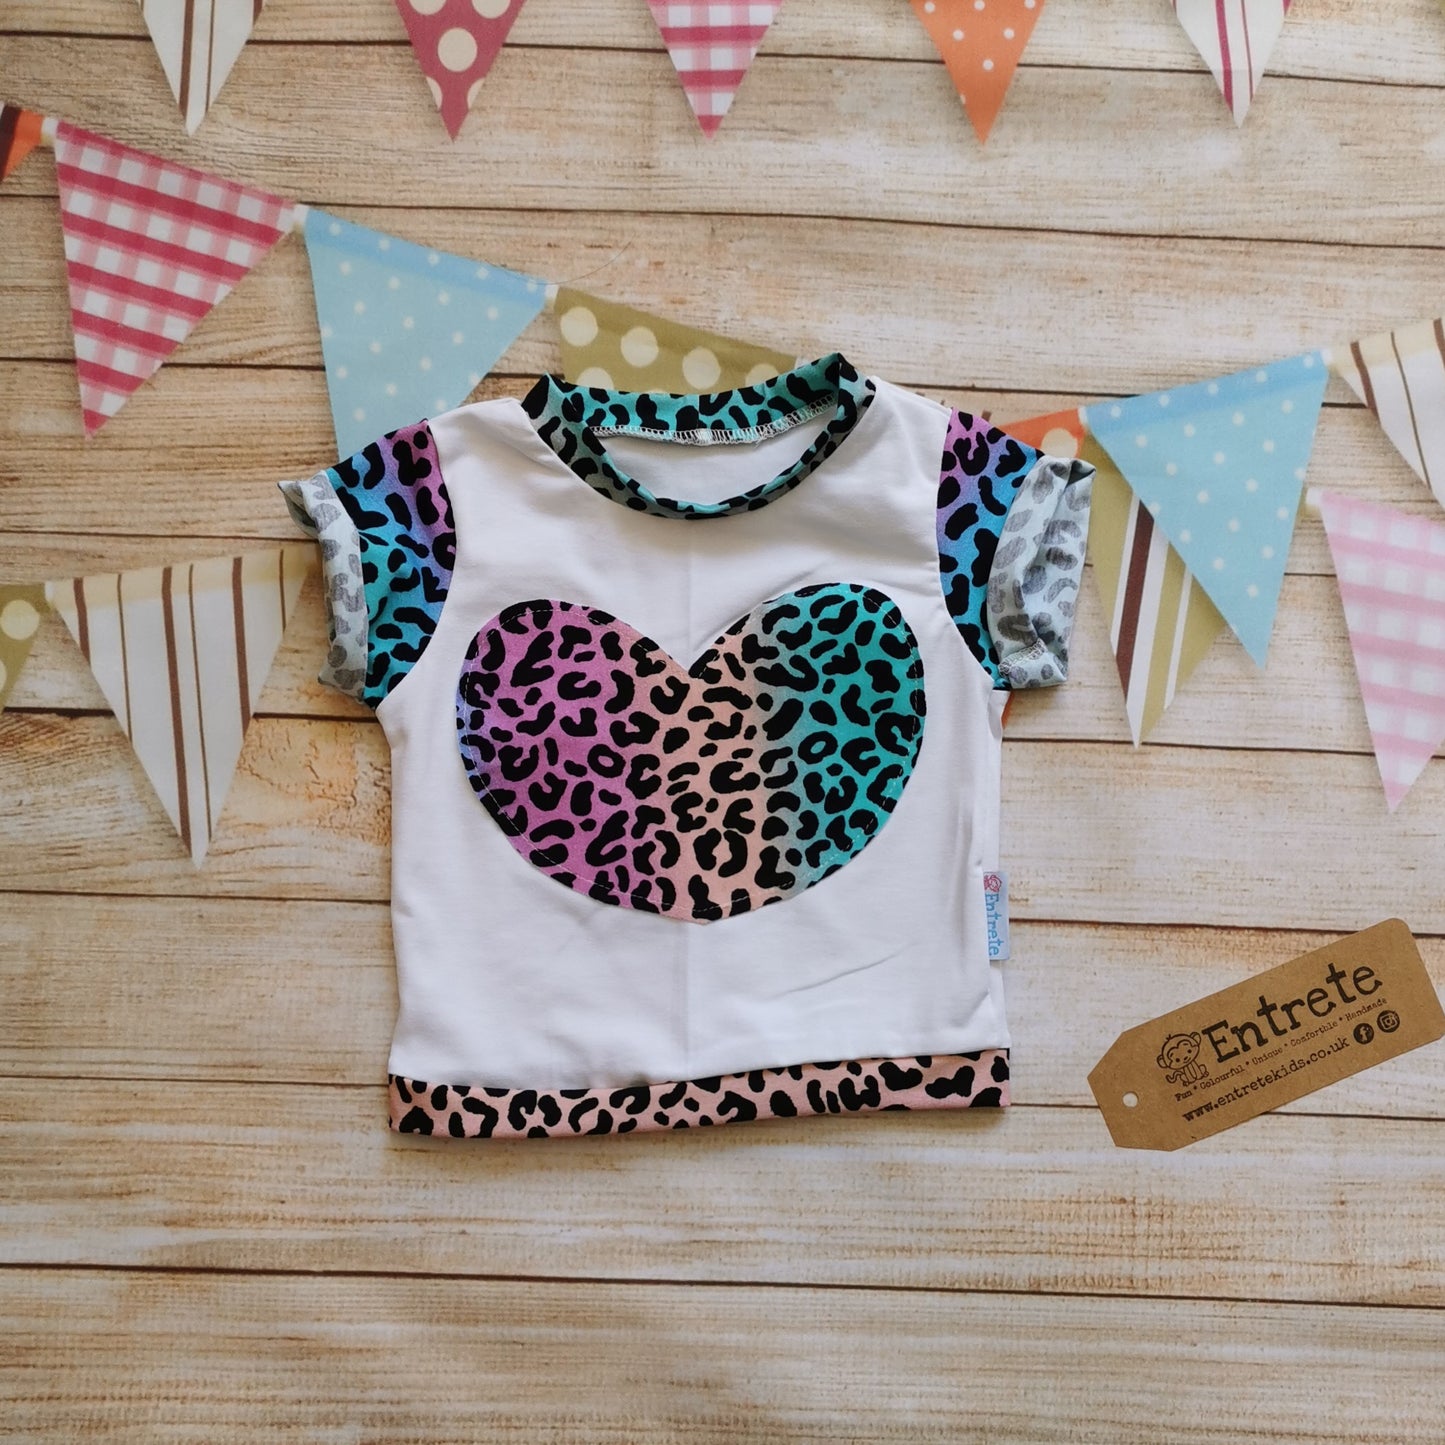 Short sleeve T-shirt, handmade using white cotton jersey offset with stunning bright rainbow leopard print cotton jersey in an adorable heart design. Soft, comfortable, stylish and with a dash of colourful animal print.